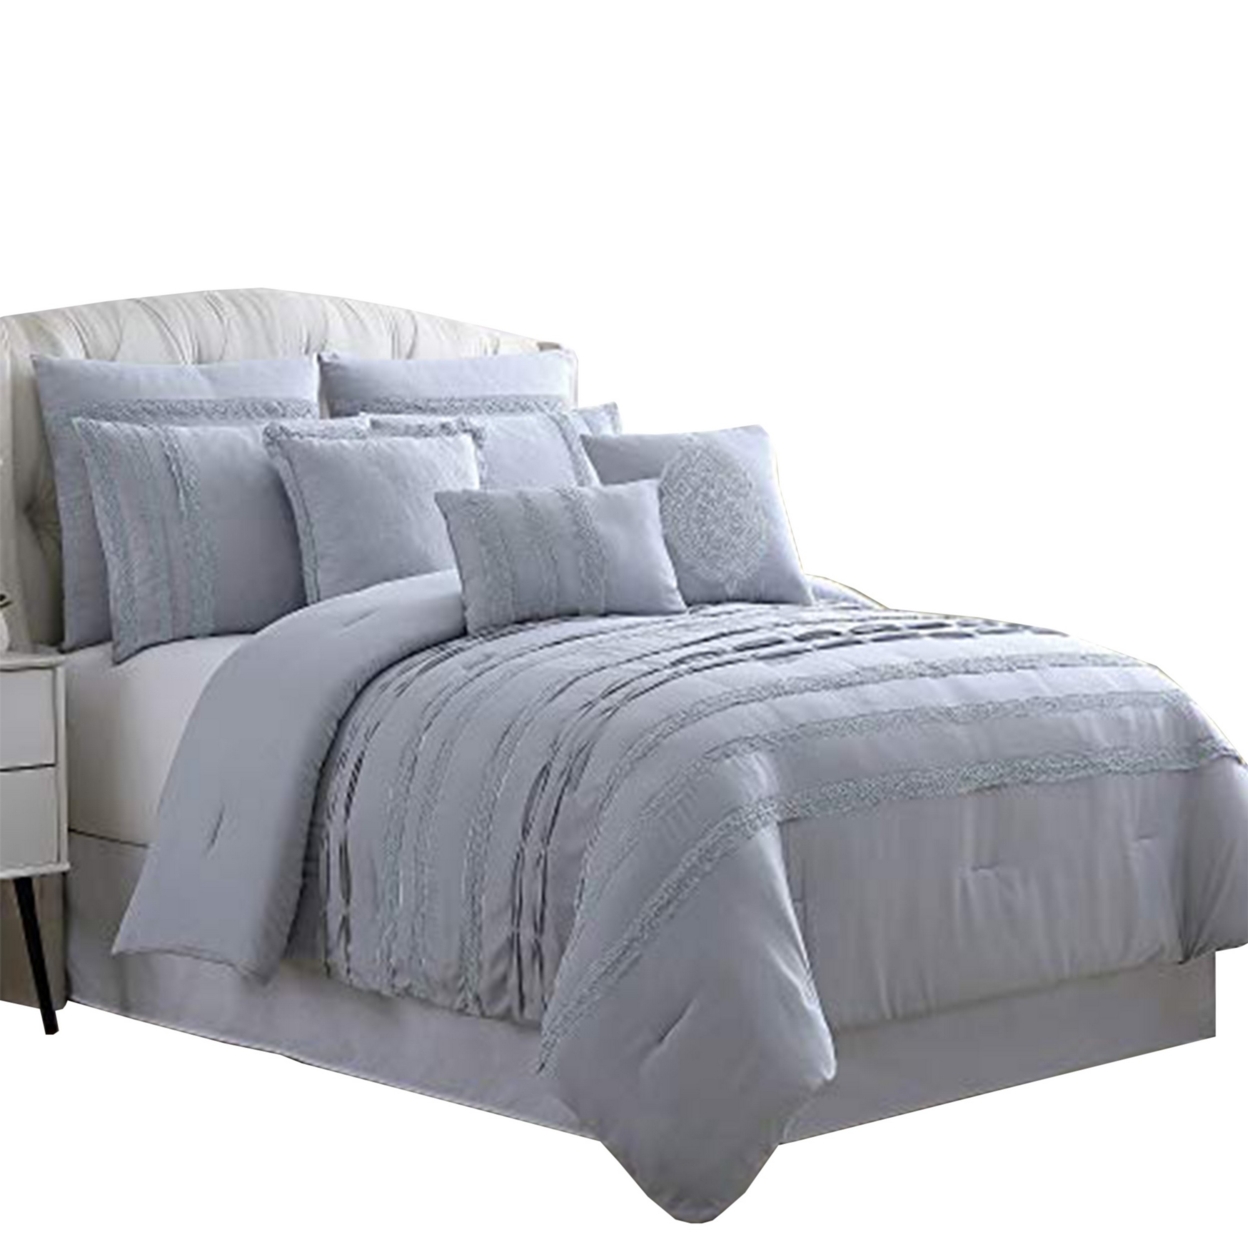 Assisi 8 Piece Queen Comforter Set With Reverse Pleats And Lace The Urban Port, Gray- Saltoro Sherpi